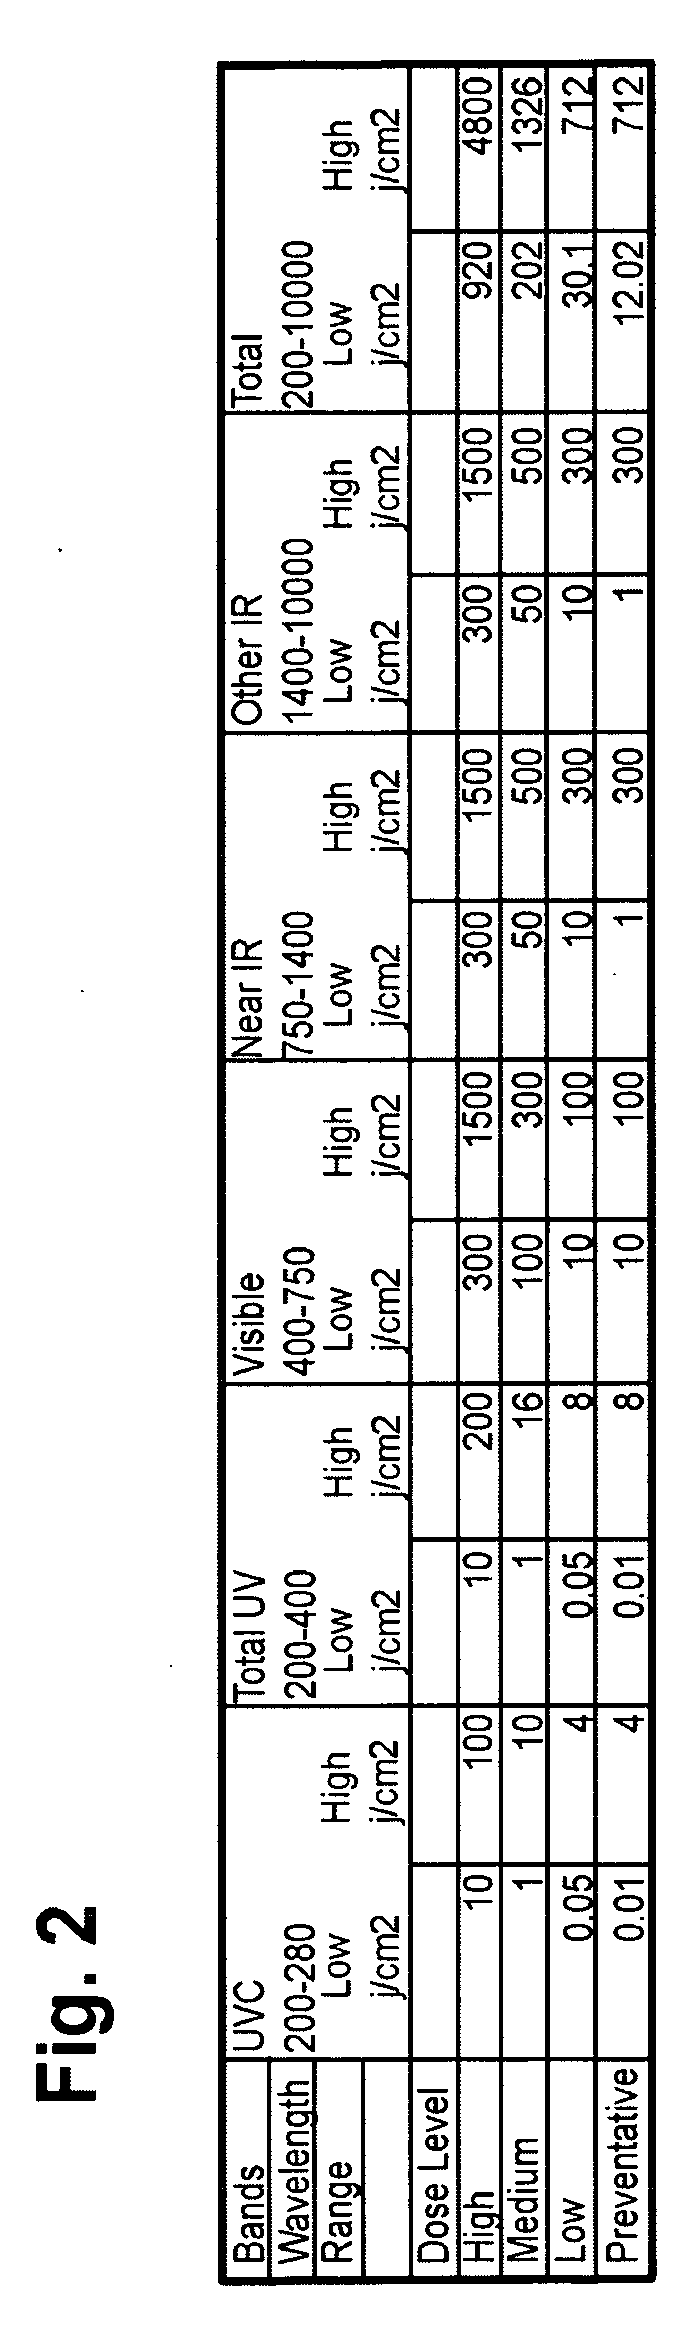 Phototherapy Treatment and Device for Infections, Diseases, and Disorders